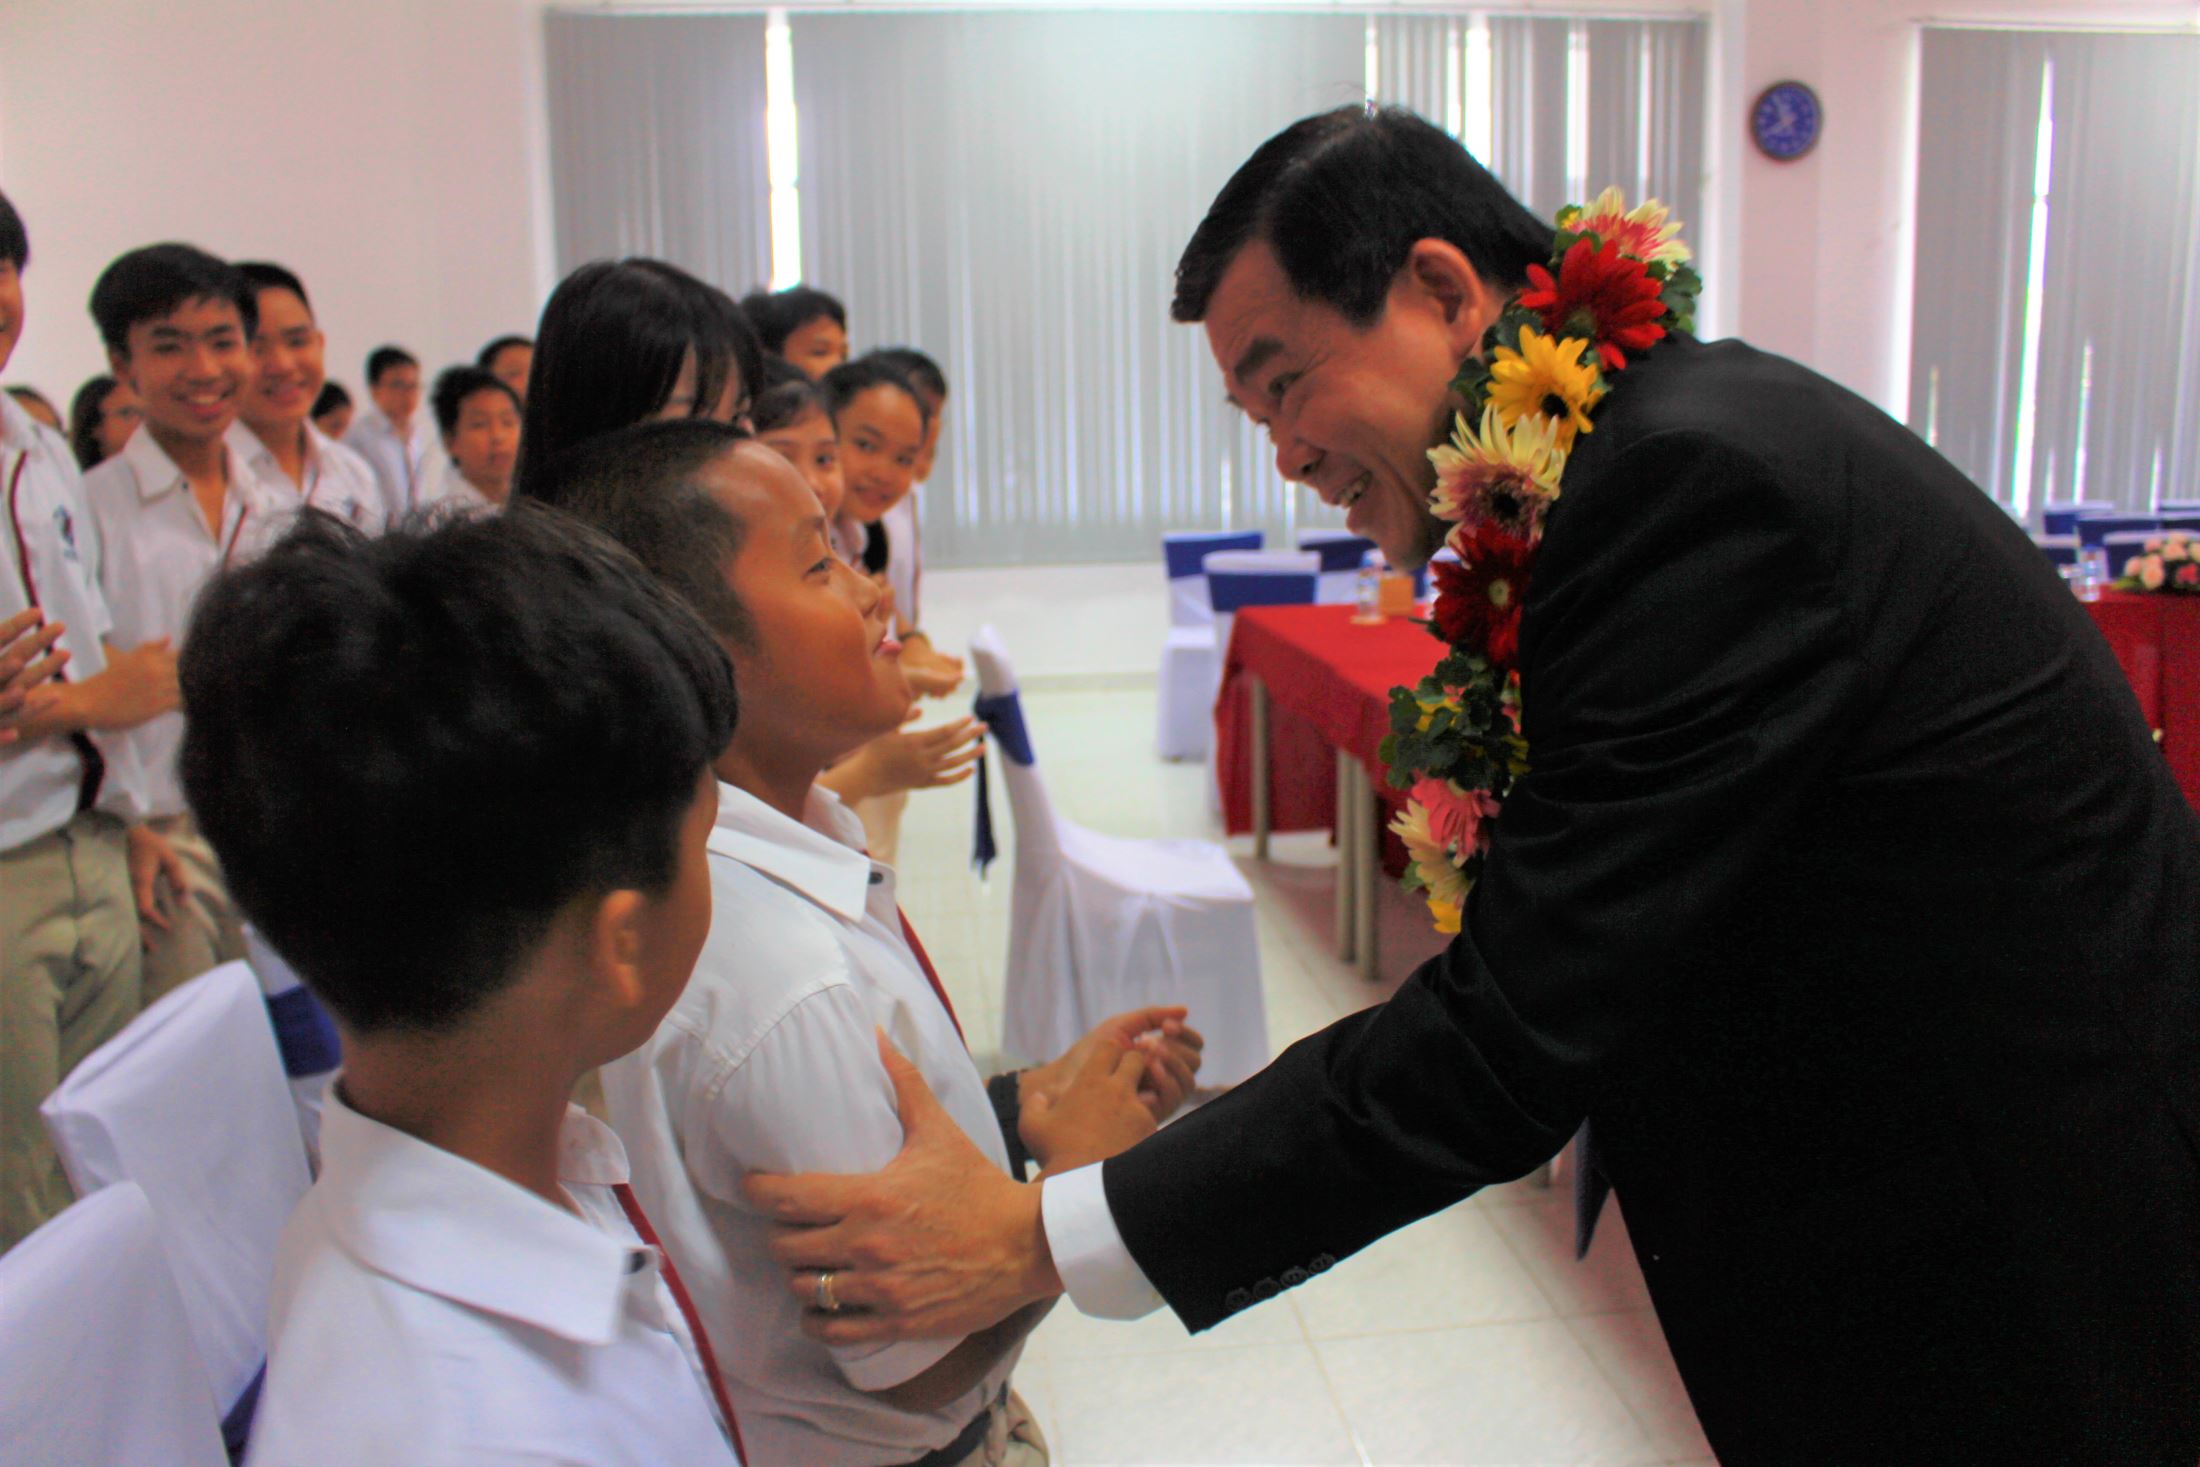 Mr. Nguyen Hong Linh - Member of the Party Central Committee, Secretary of the Baria-Vungtau Provincial Party Committee, Chairman of the People's Council of Ba Ria - Vung Tau Province talked to UKA students on his visit to the school on the occasion of Vietnamese Teacher’s Day November 20th.